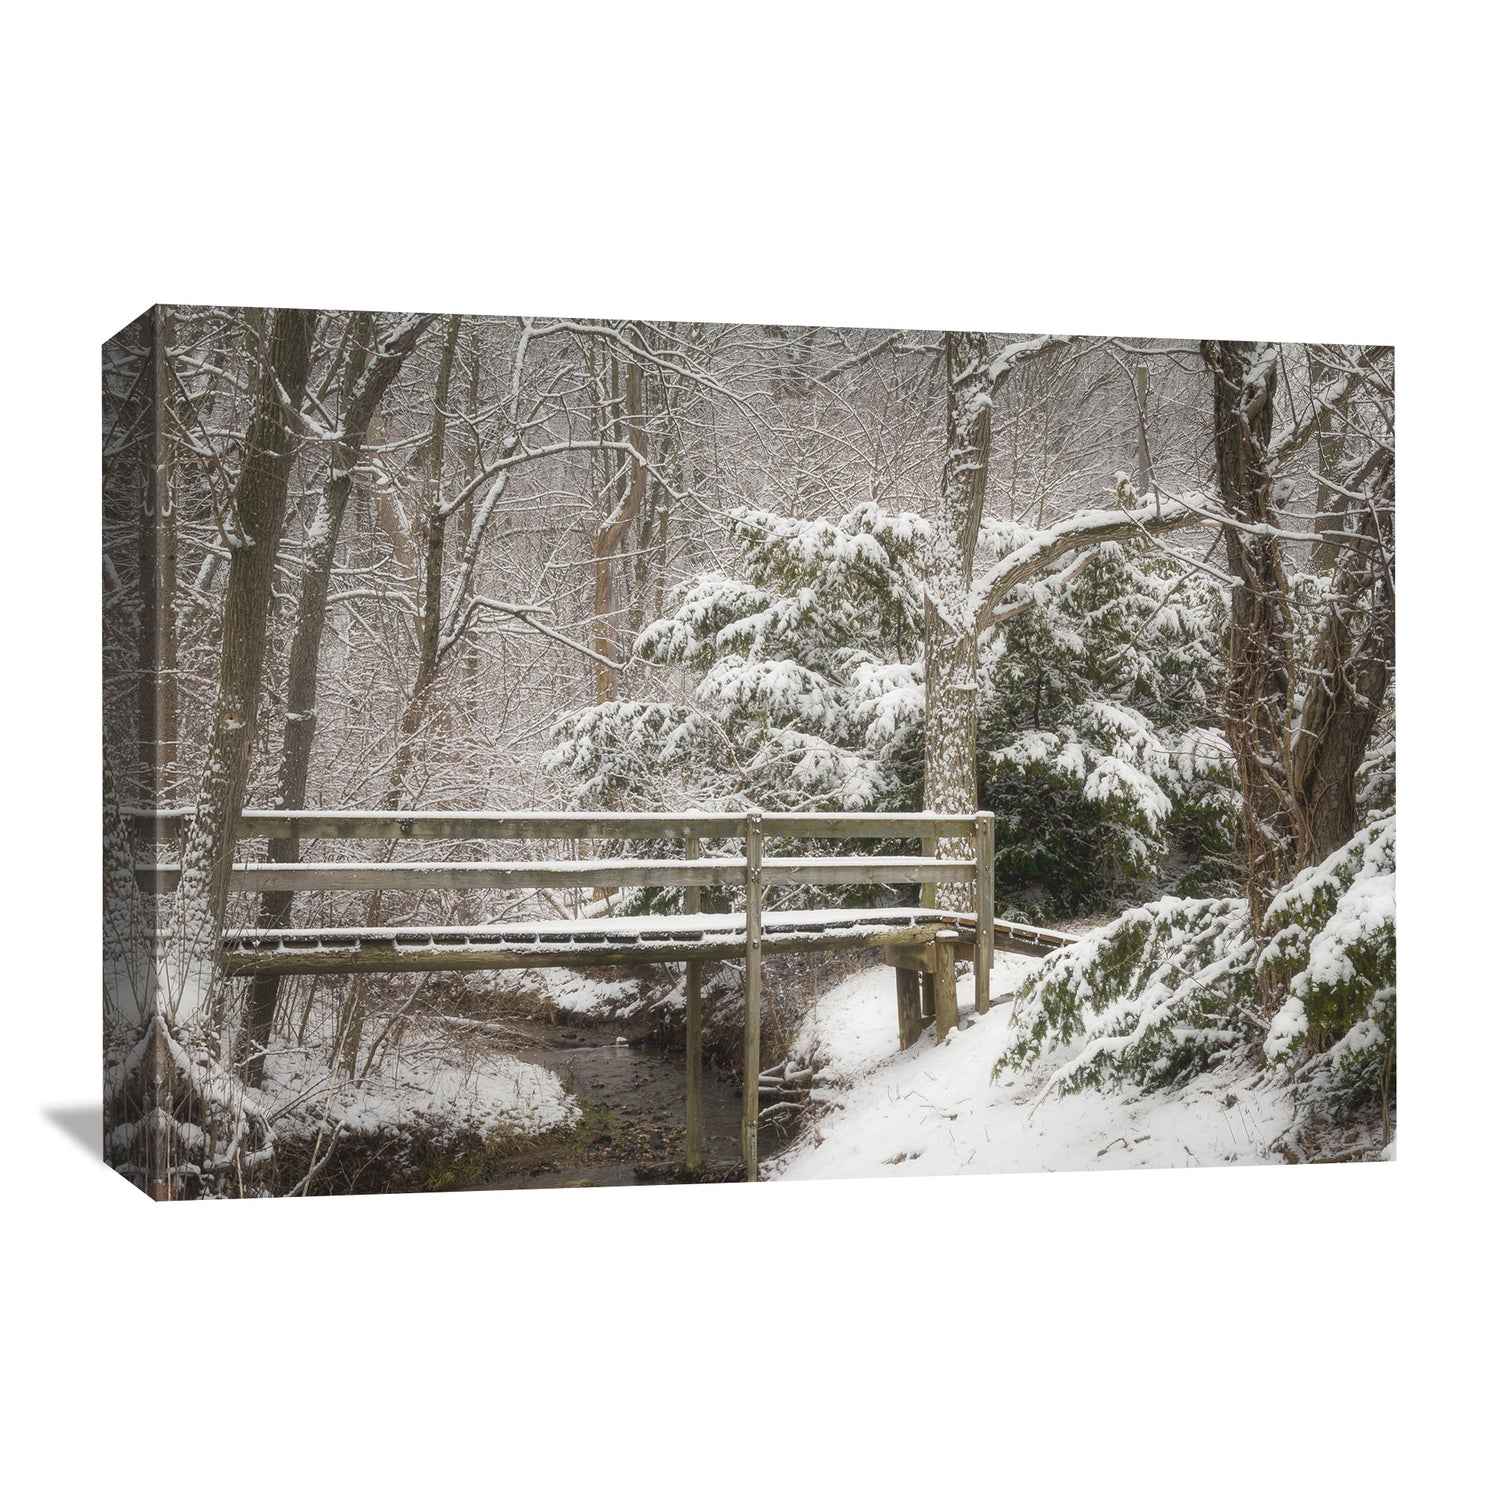 Wall art featuring a winter scene with heavy snow blanketing evergreen trees and a wooden bridge, conjuring the serene essence of a cold, peaceful day in nature.